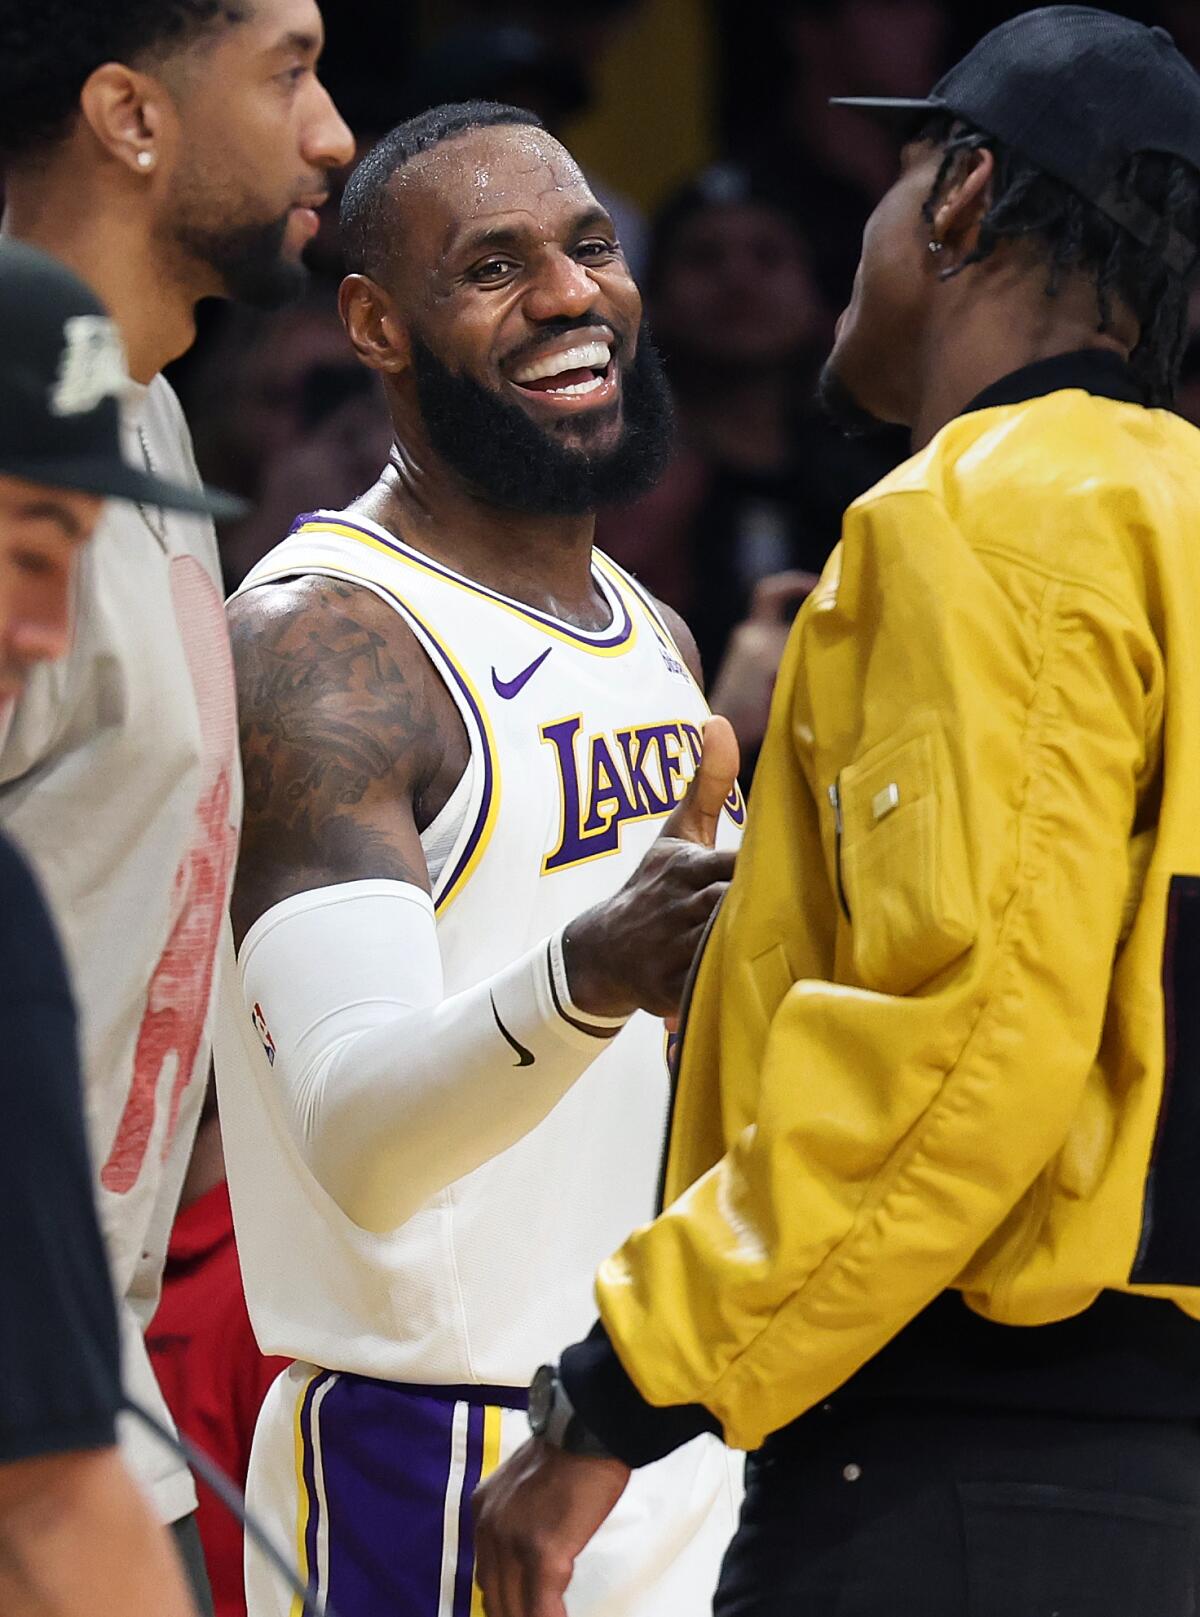 LeBron James celebrates after scoring his 40,000th career point.